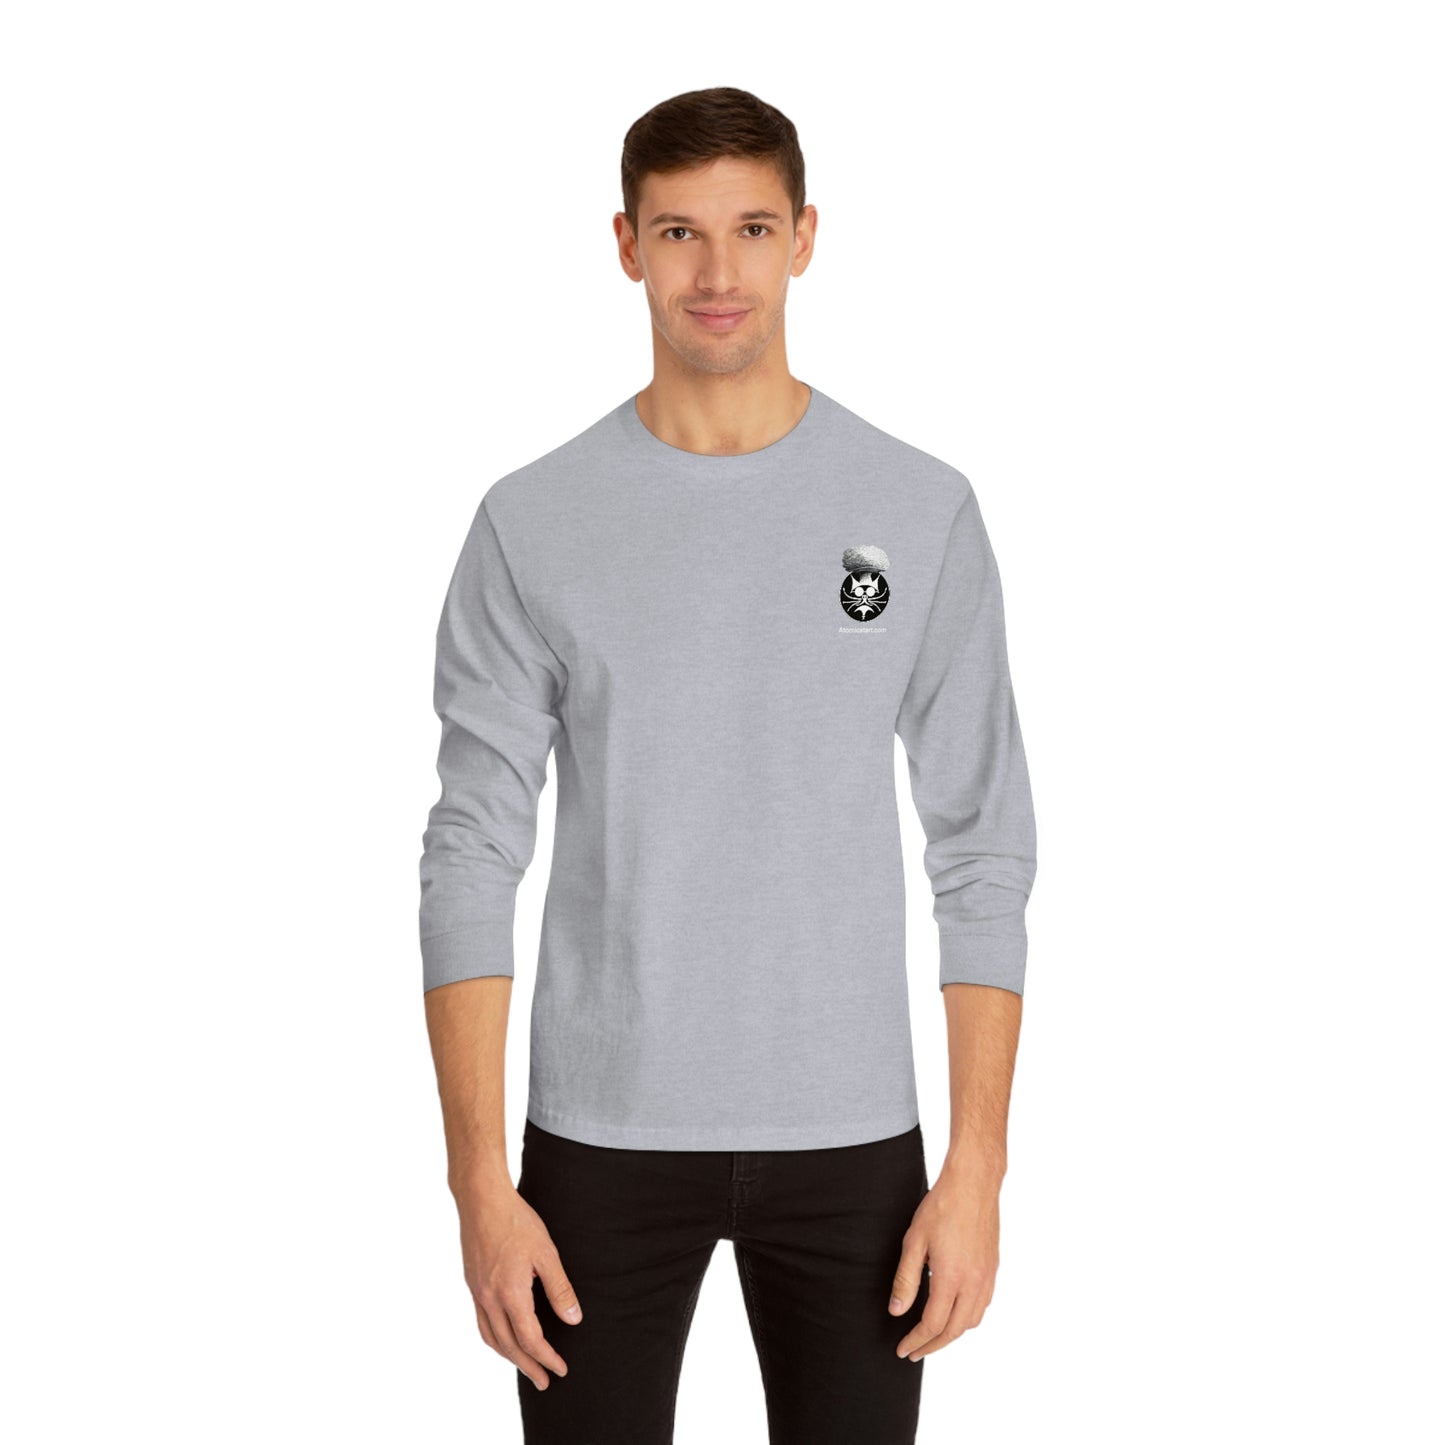 What's in your closet? Long sleeve - Front logo